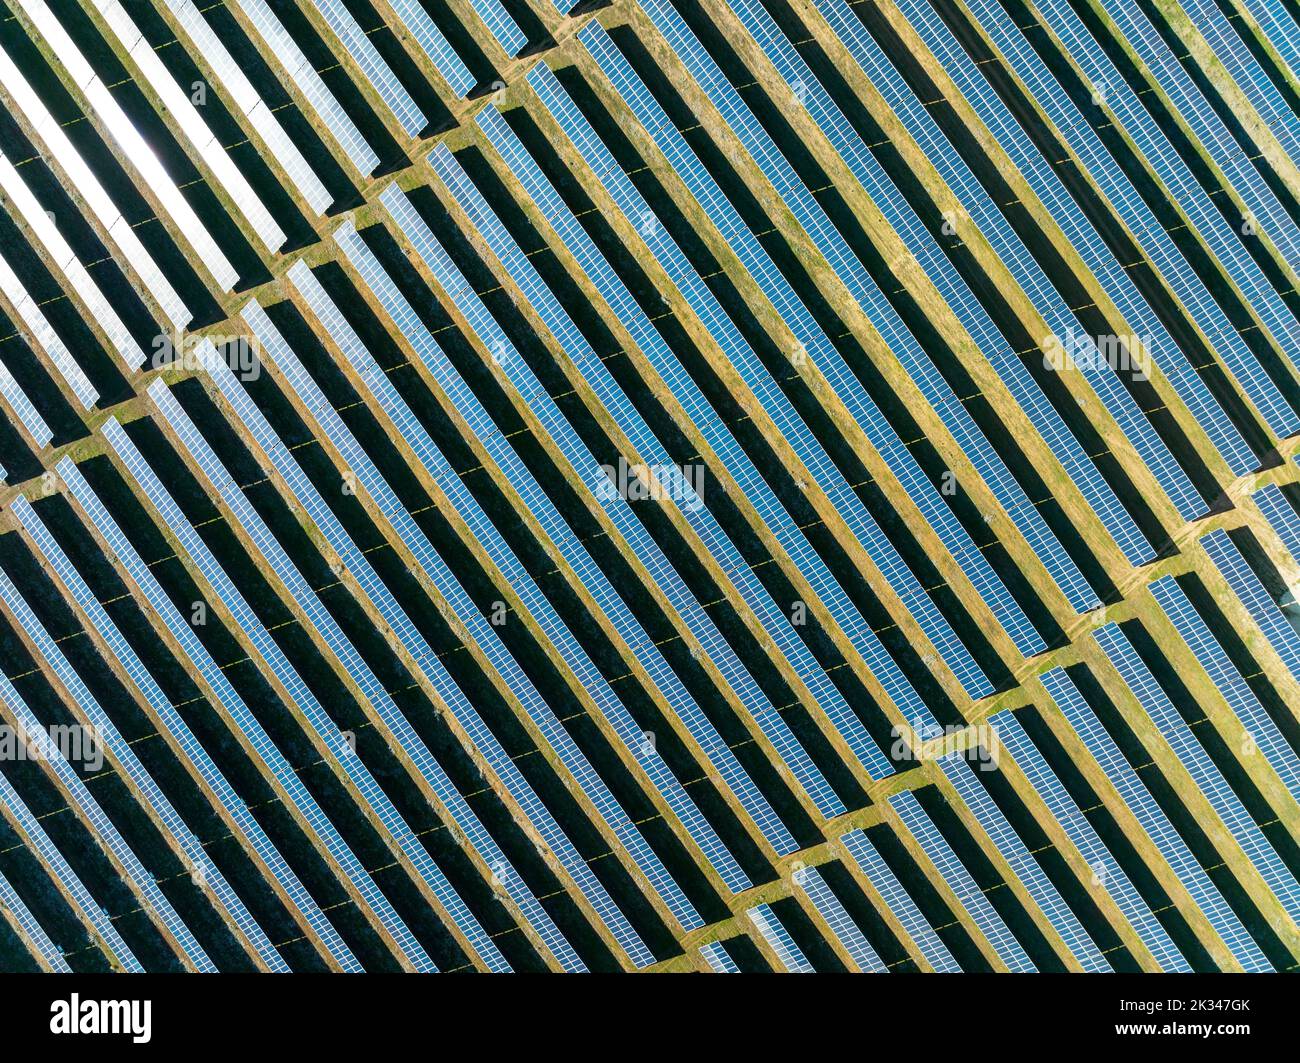 Rows of solar panels at a photovoltaic plant near Espejo, aerial view, drone shot, Cordoba province, Andalucia, Spain Stock Photo